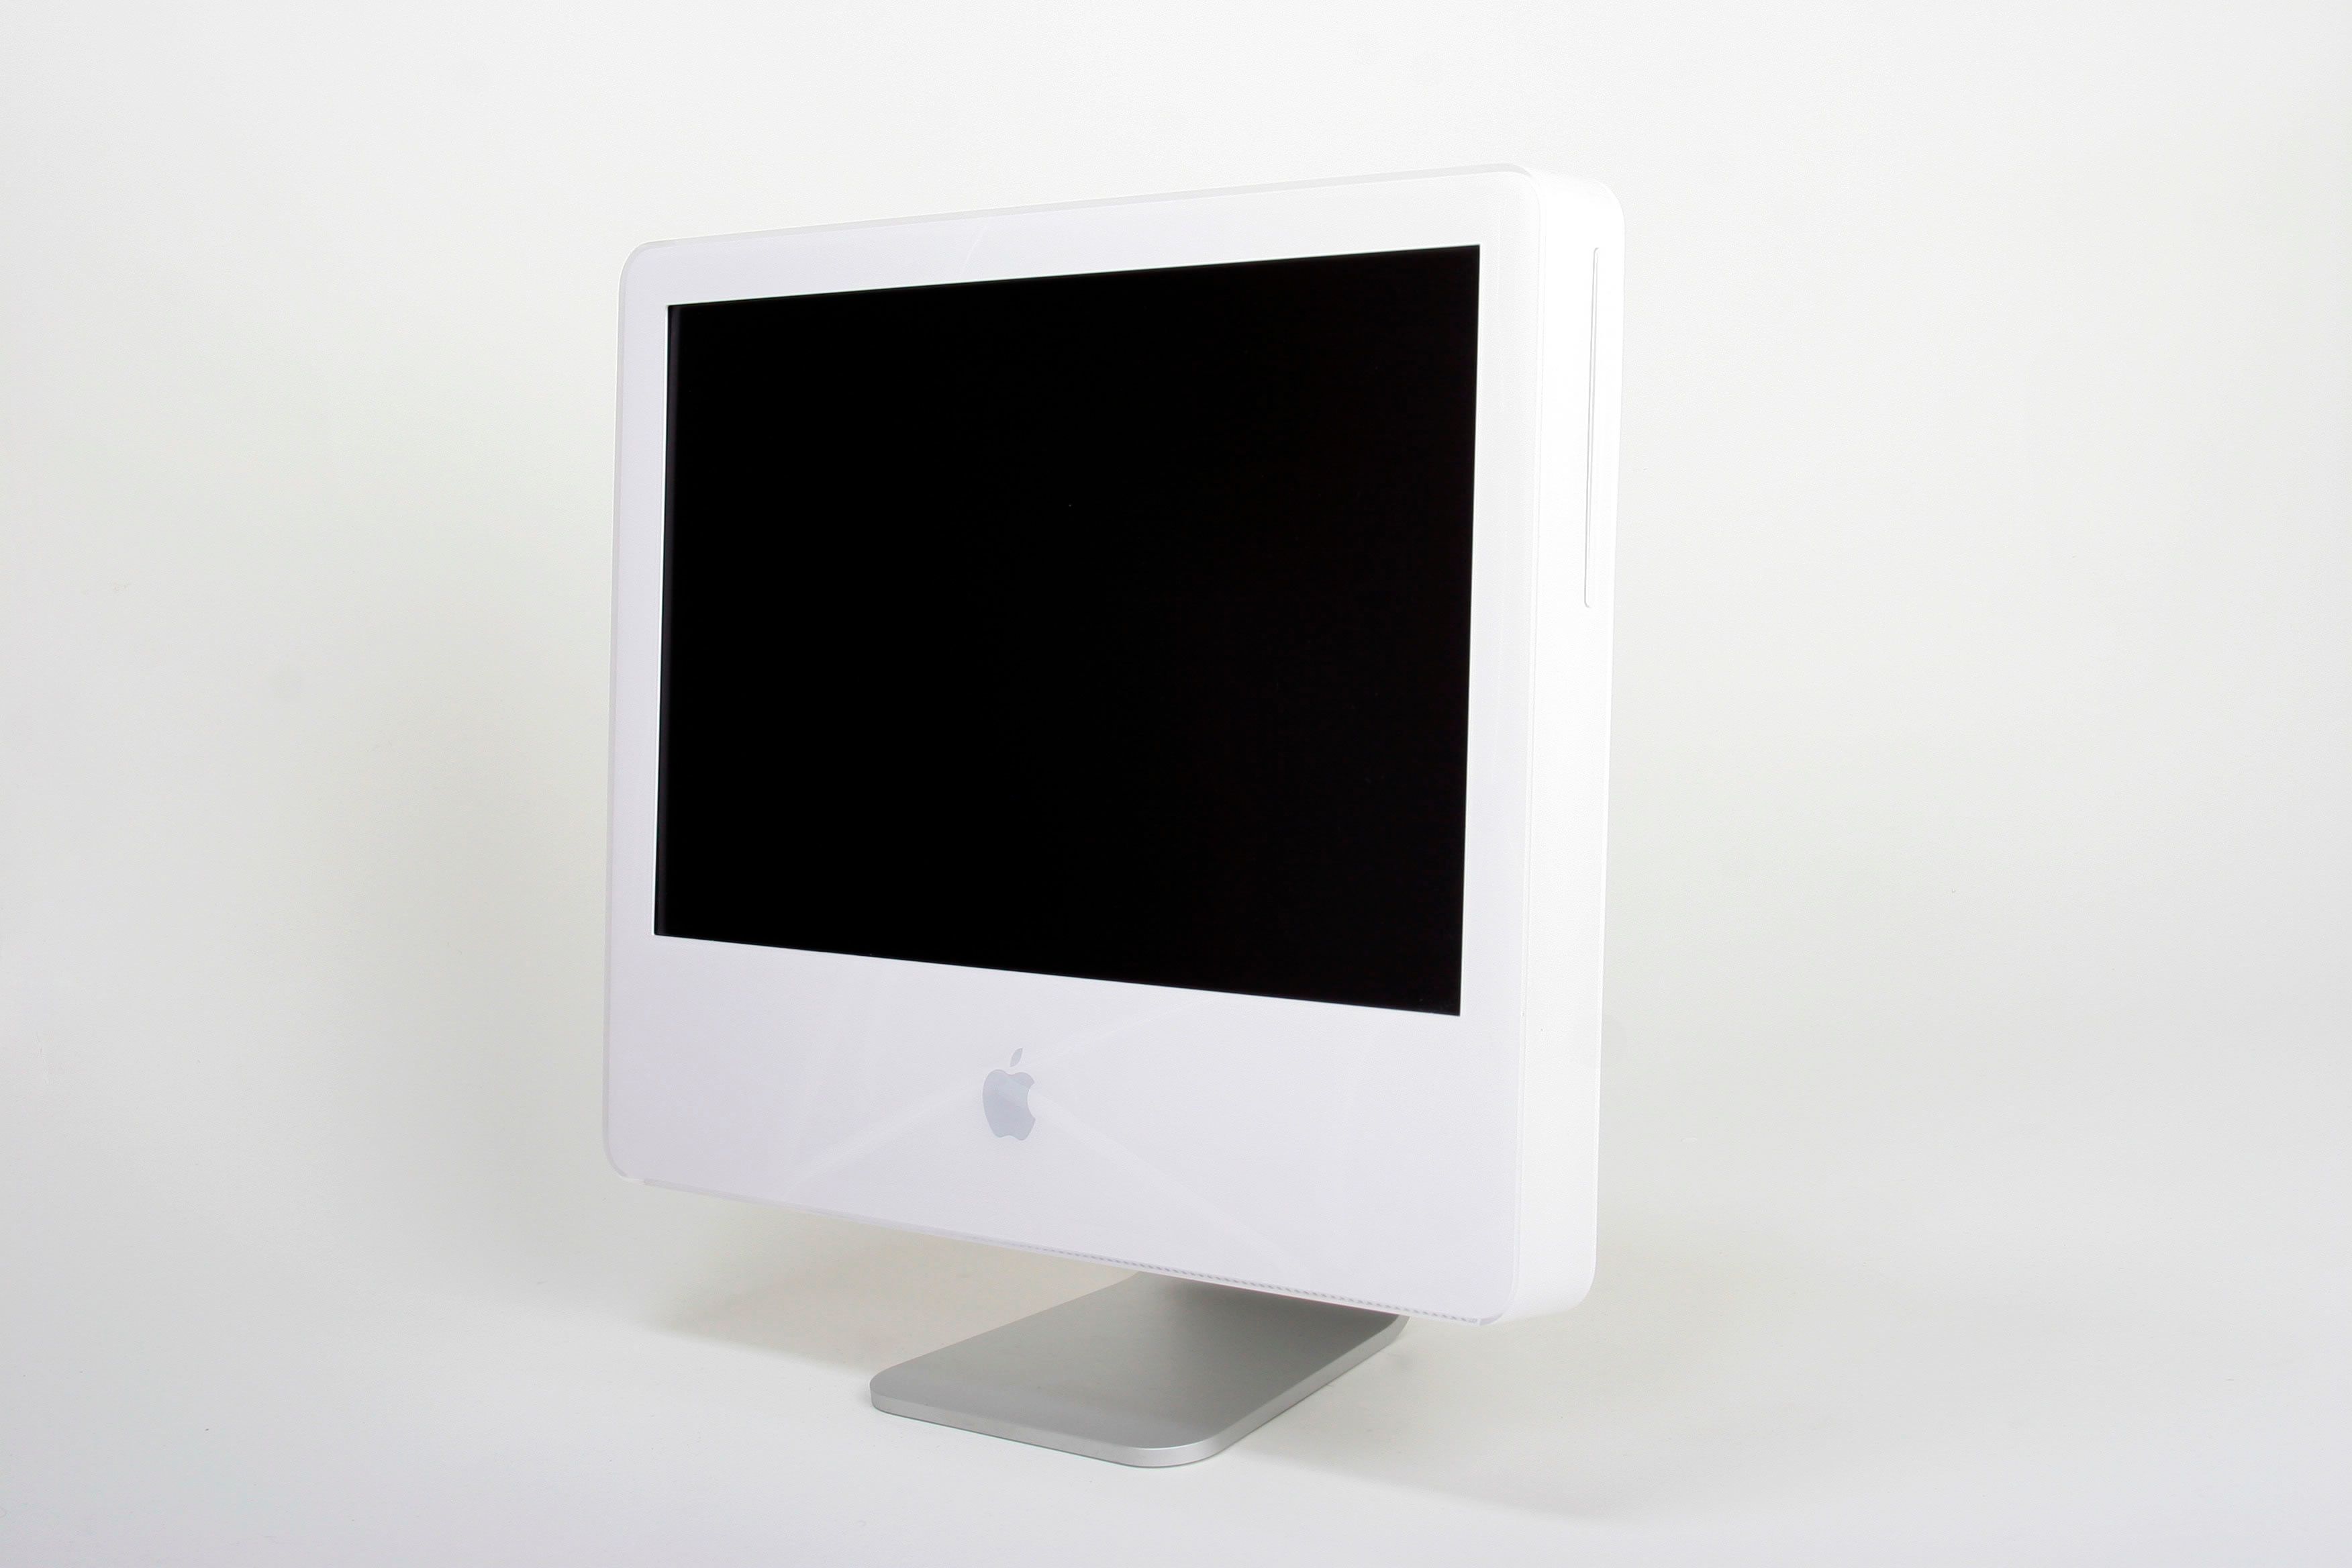 An iMac G5 sits at a 3/4 angle on a white background